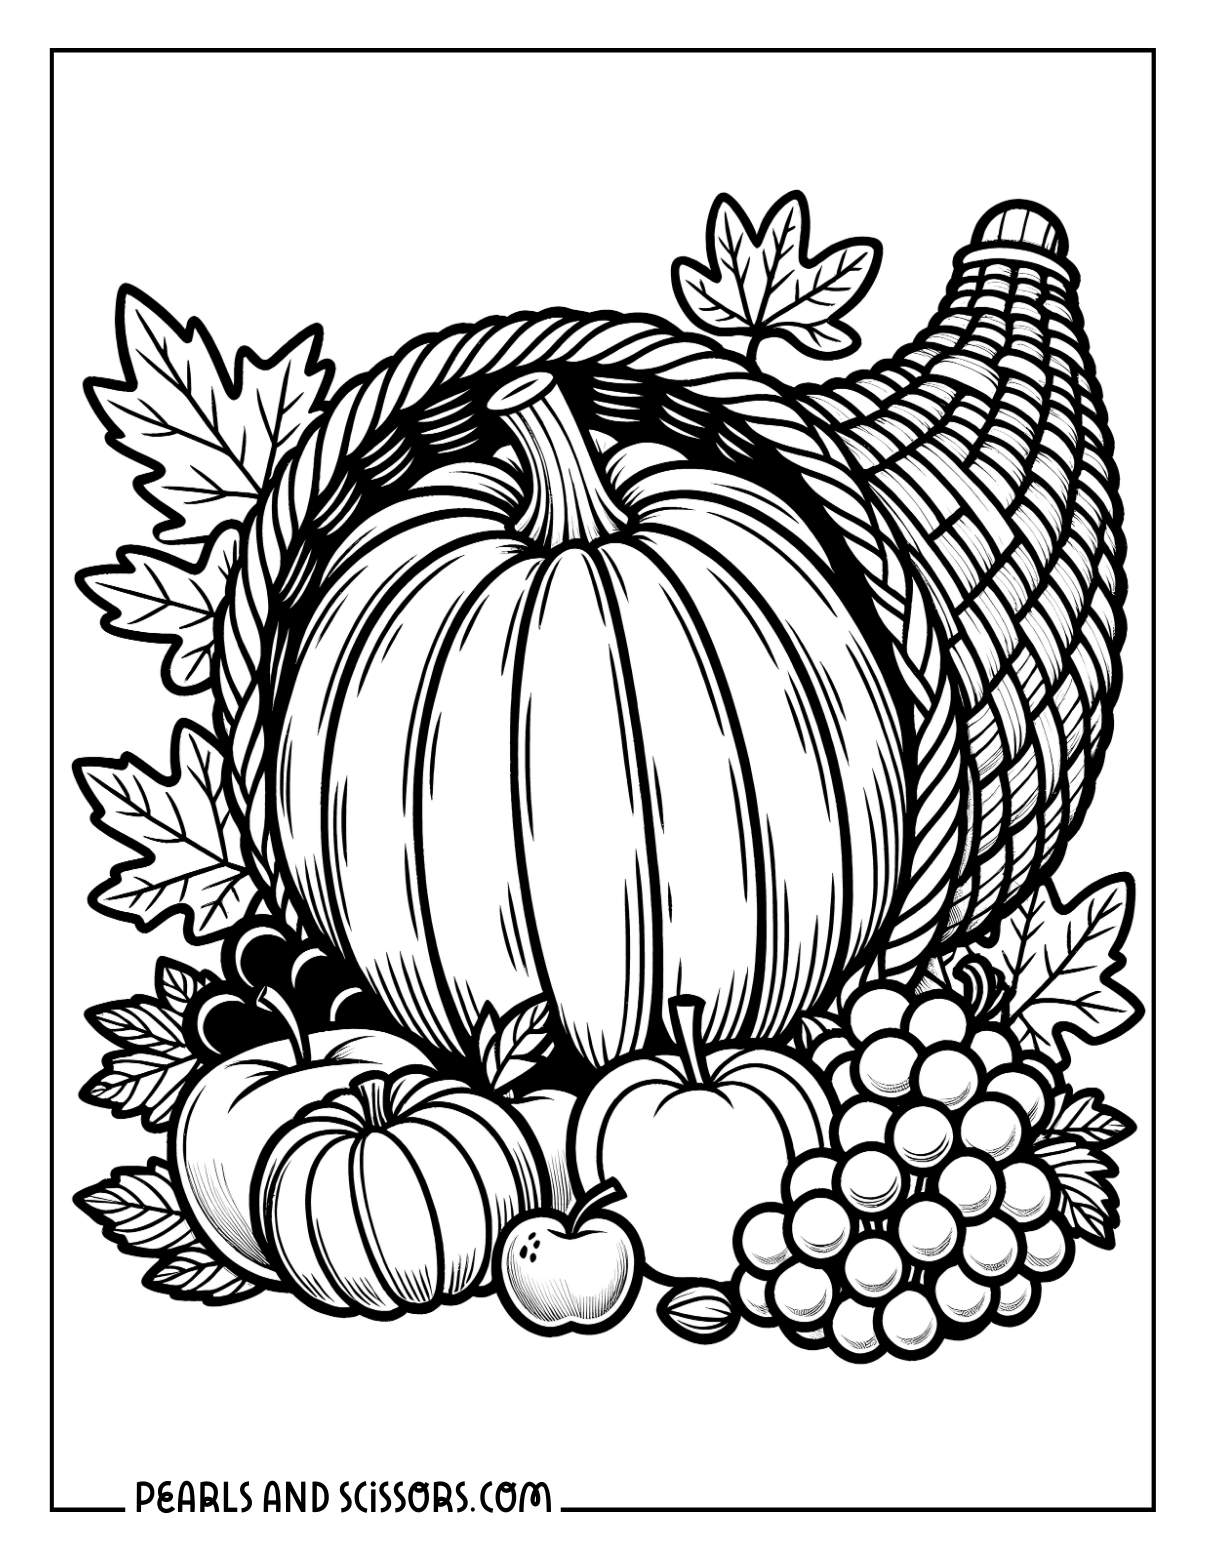 Thanksgiving harvest wreath coloring sheet.